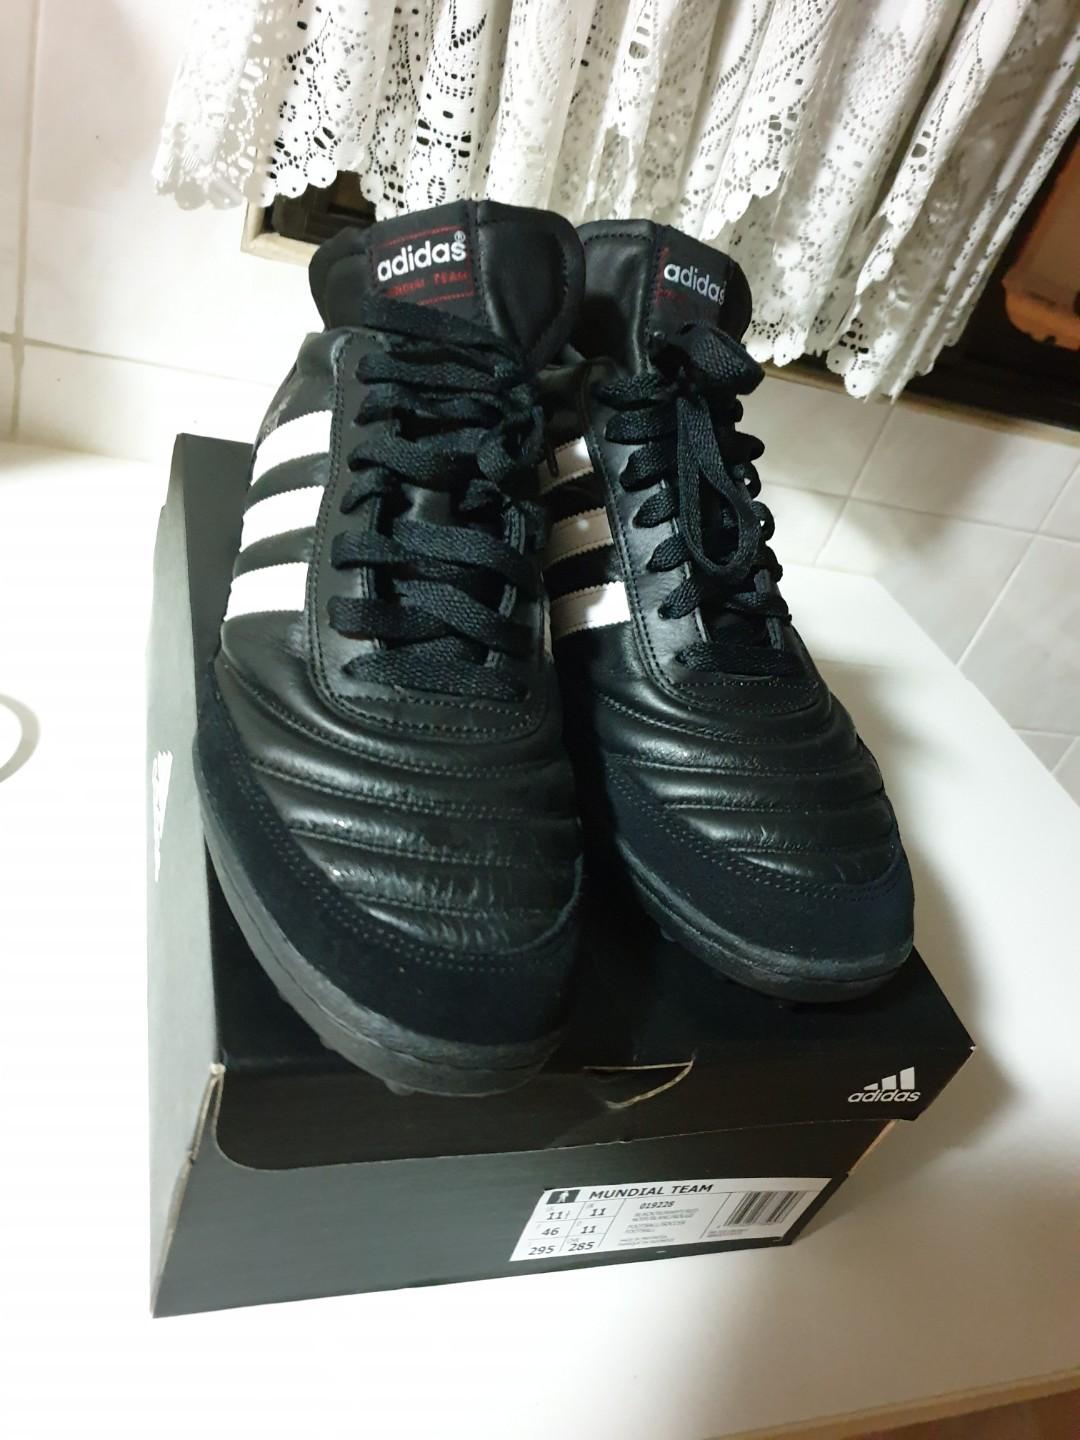 adidas copa mundial team leather turf shoes